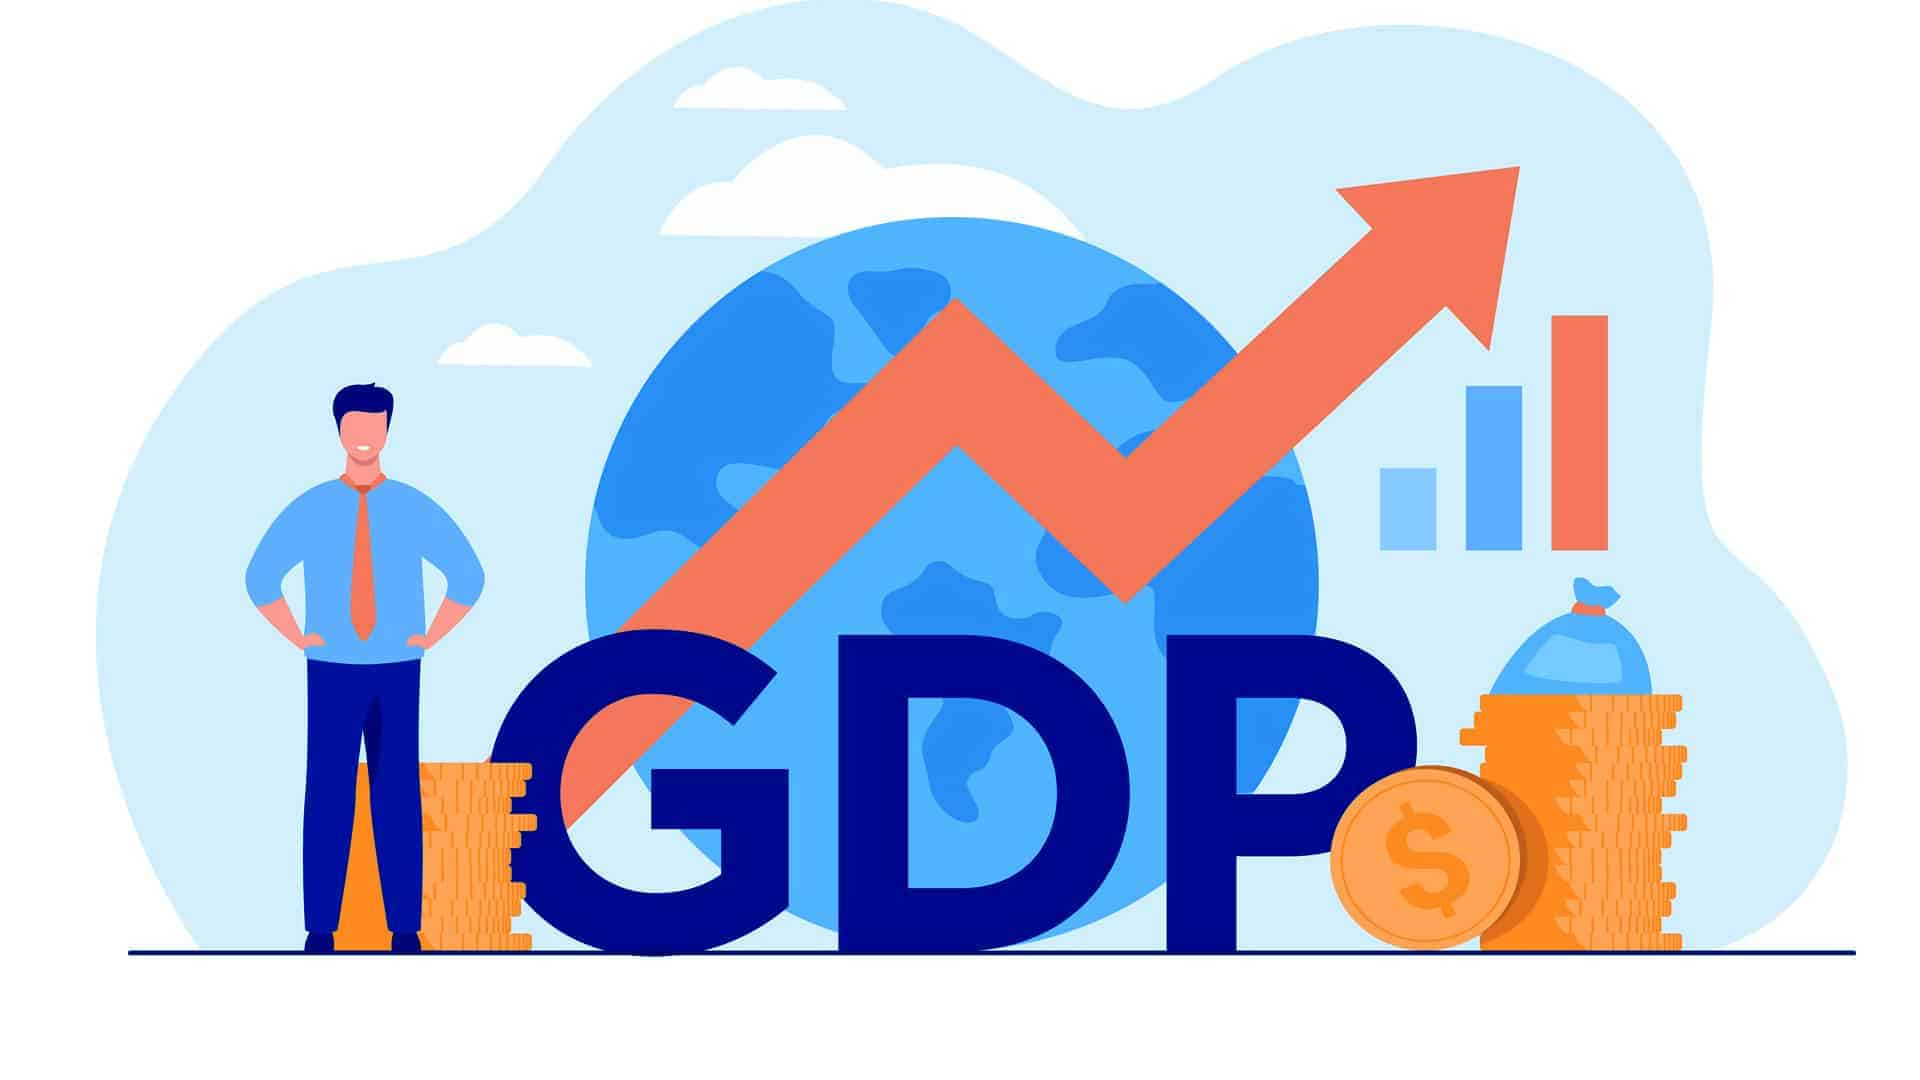 Fiscal deficit for 2021-22 at 6.7 pc of GDP, lower than earlier estimate: CGA